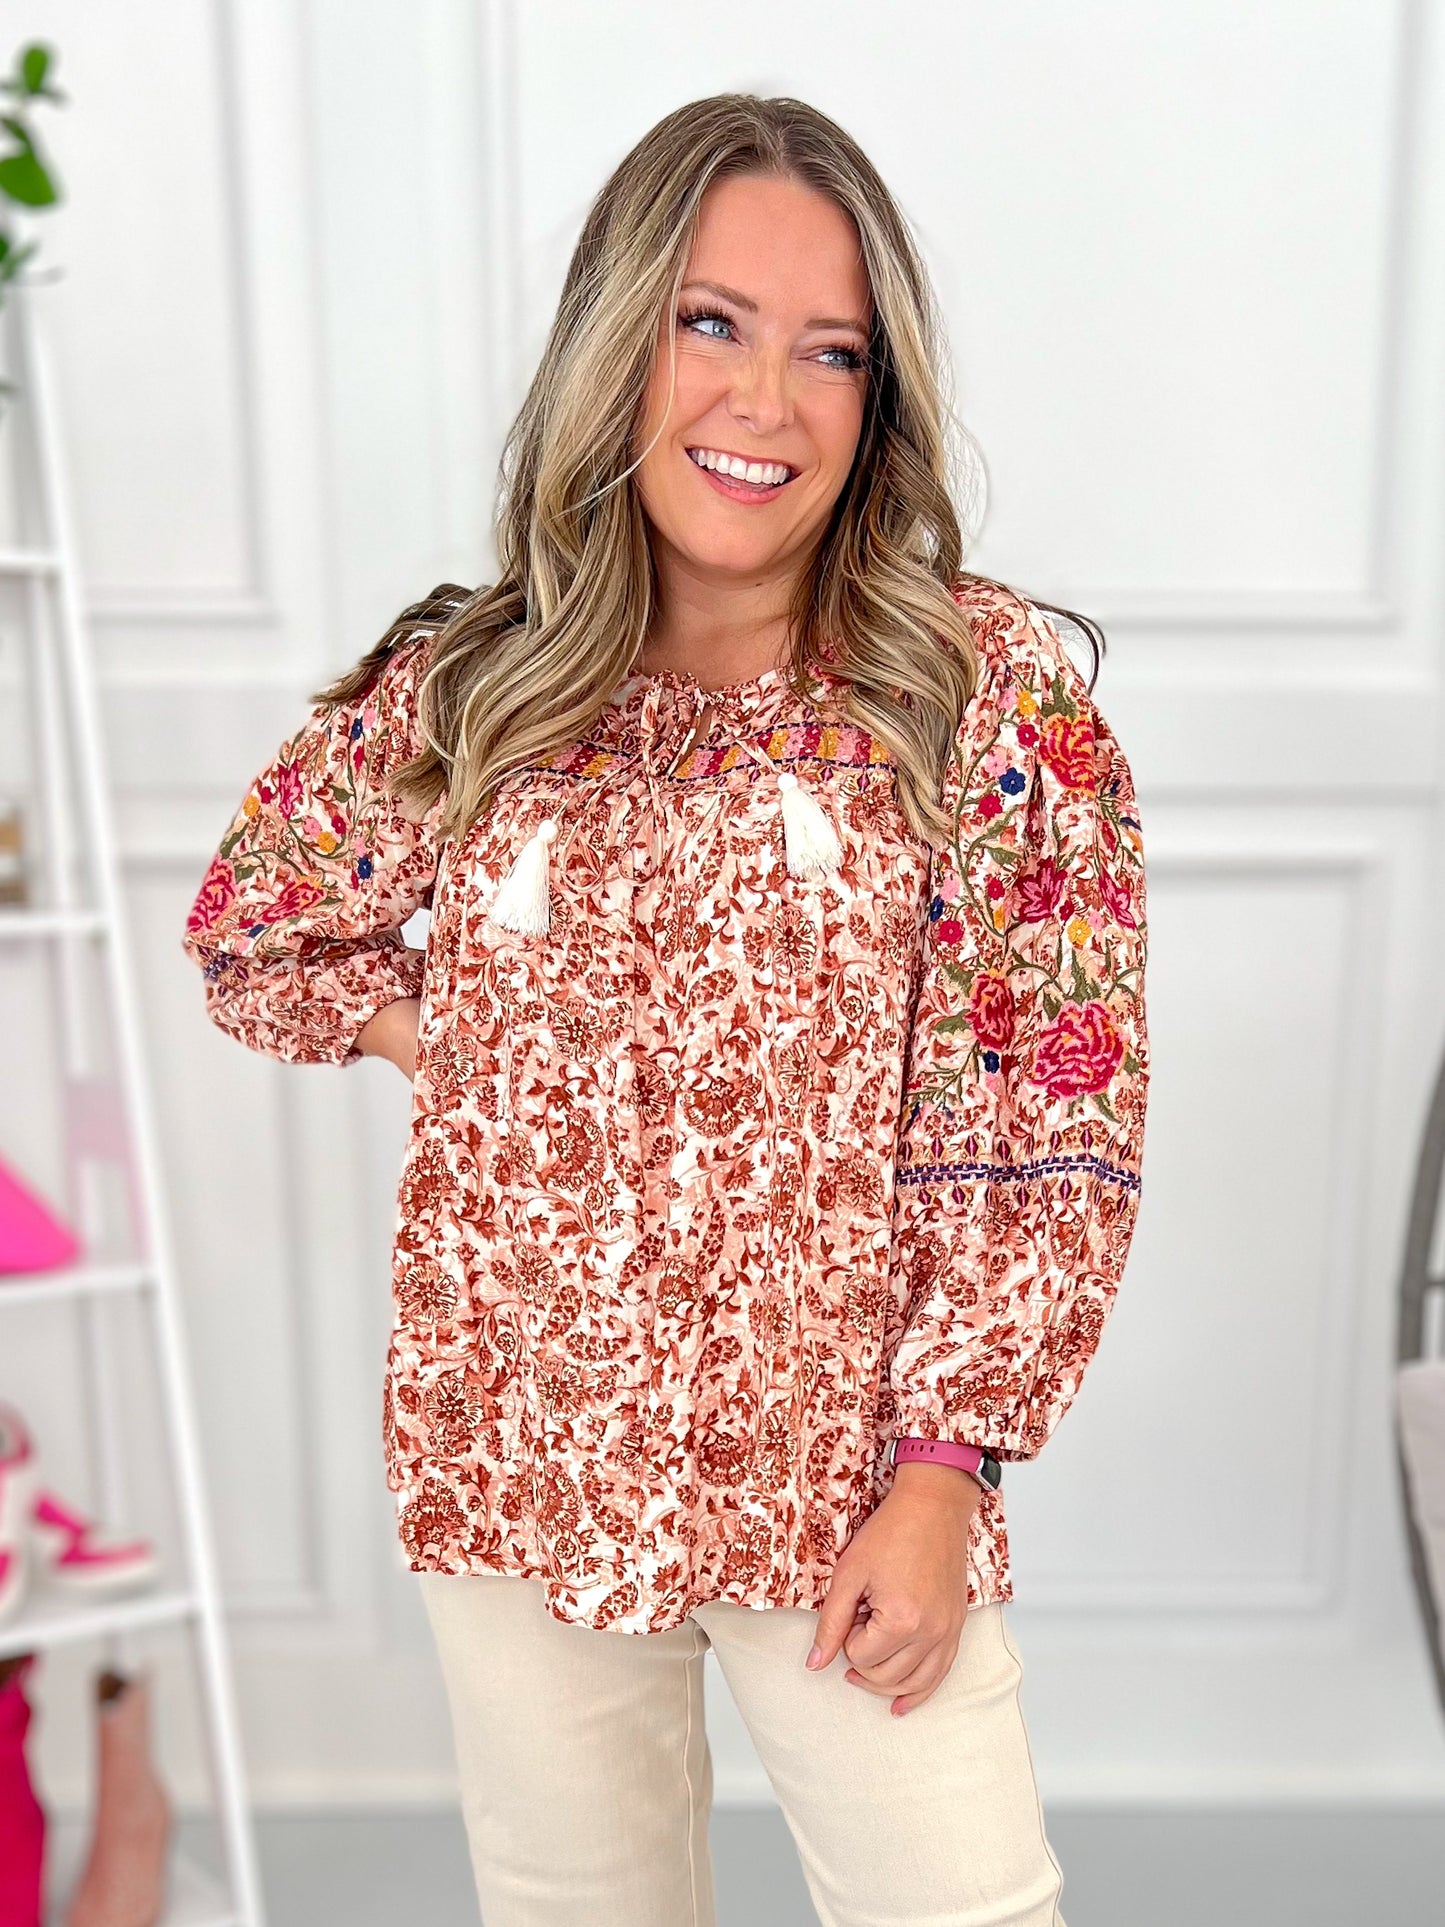 Tuscan Sun Embroidered Blouse